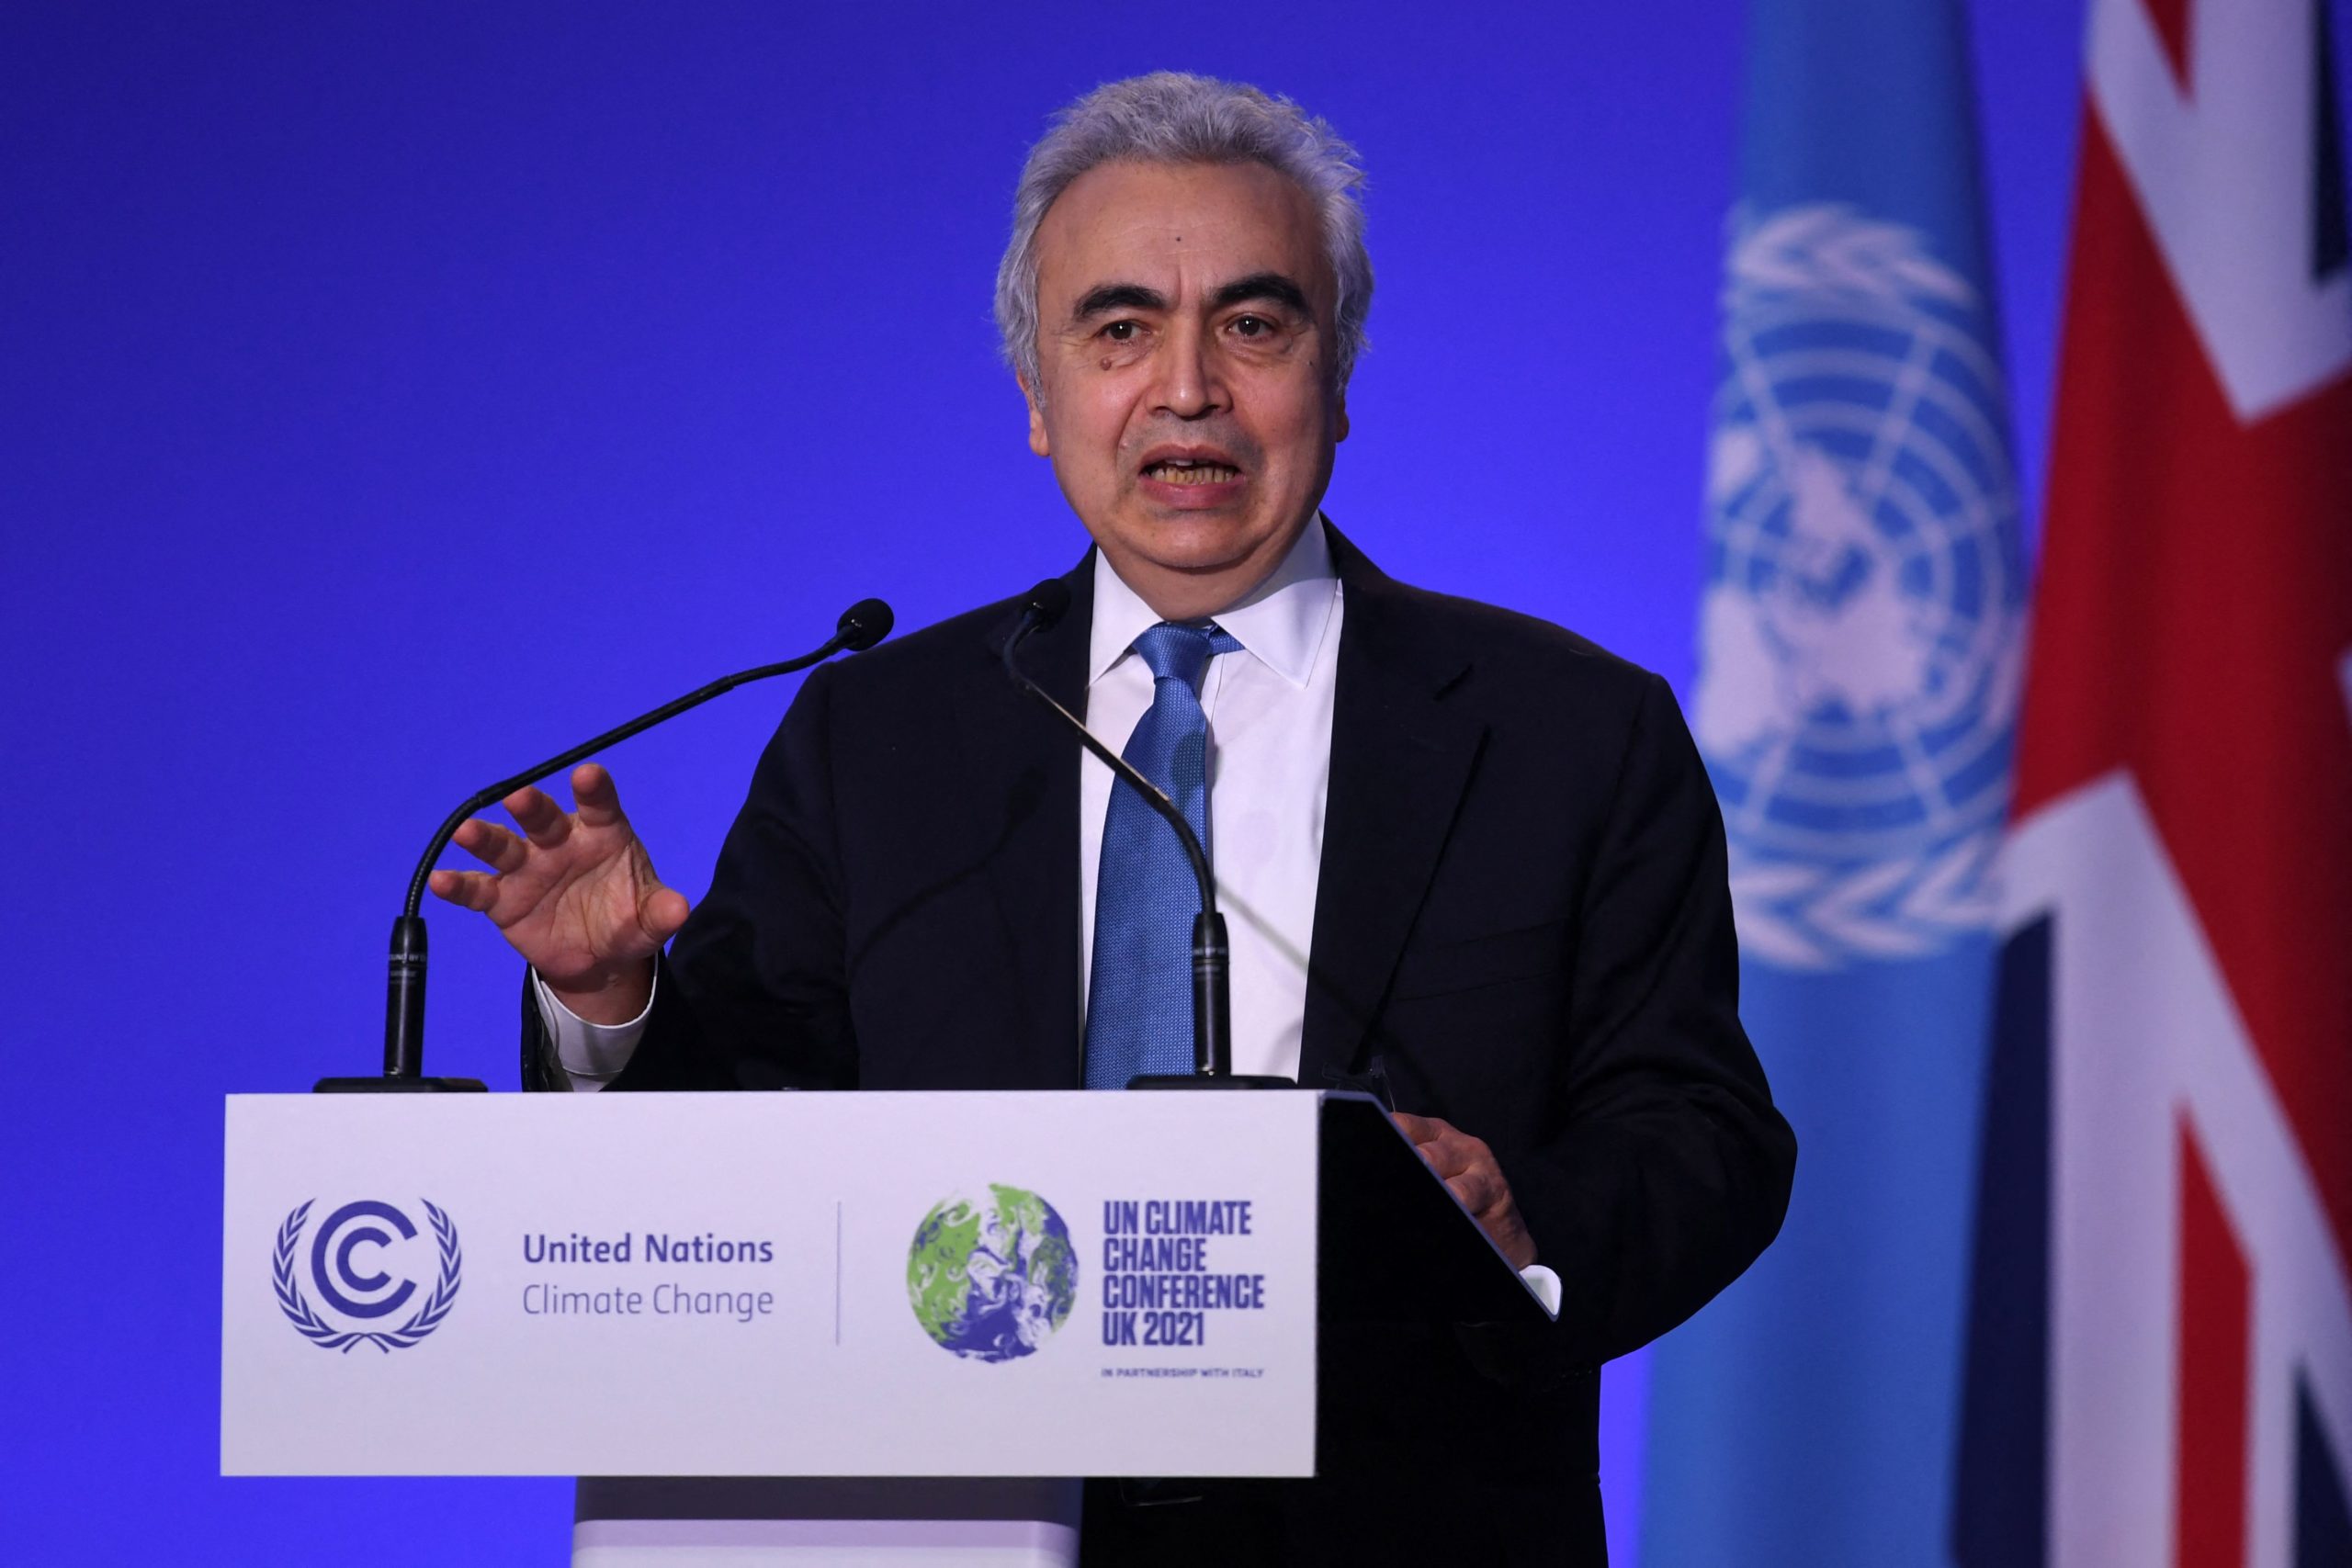 International Energy Agency Executive Director Fatih Birol addresses the COP26 UN Climate Summit in Glasgow on Nov. 4, 2021. (Daniel Leal/AFP via Getty Images)